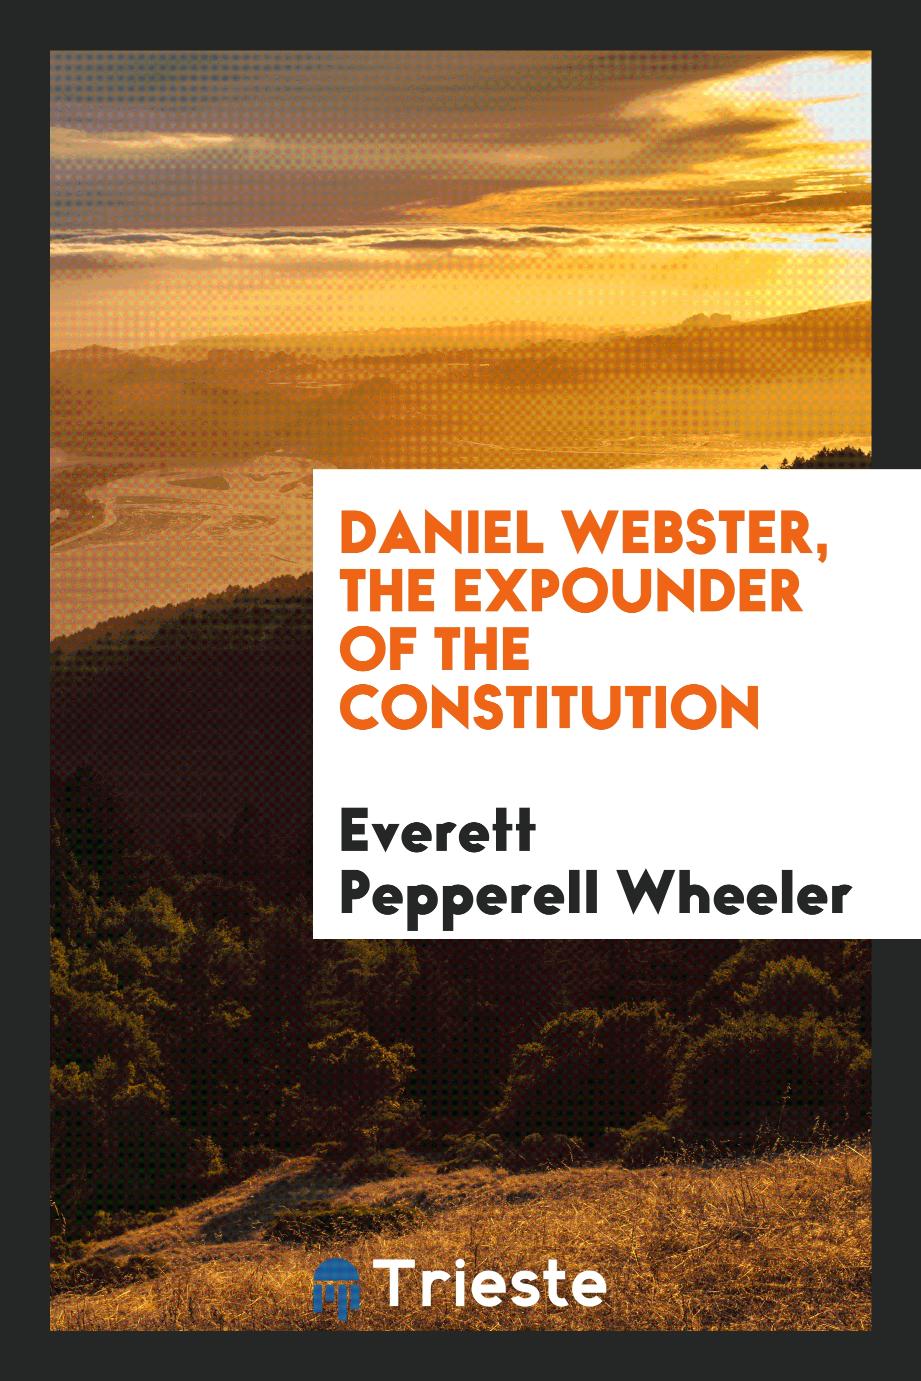 Daniel Webster, the expounder of the Constitution